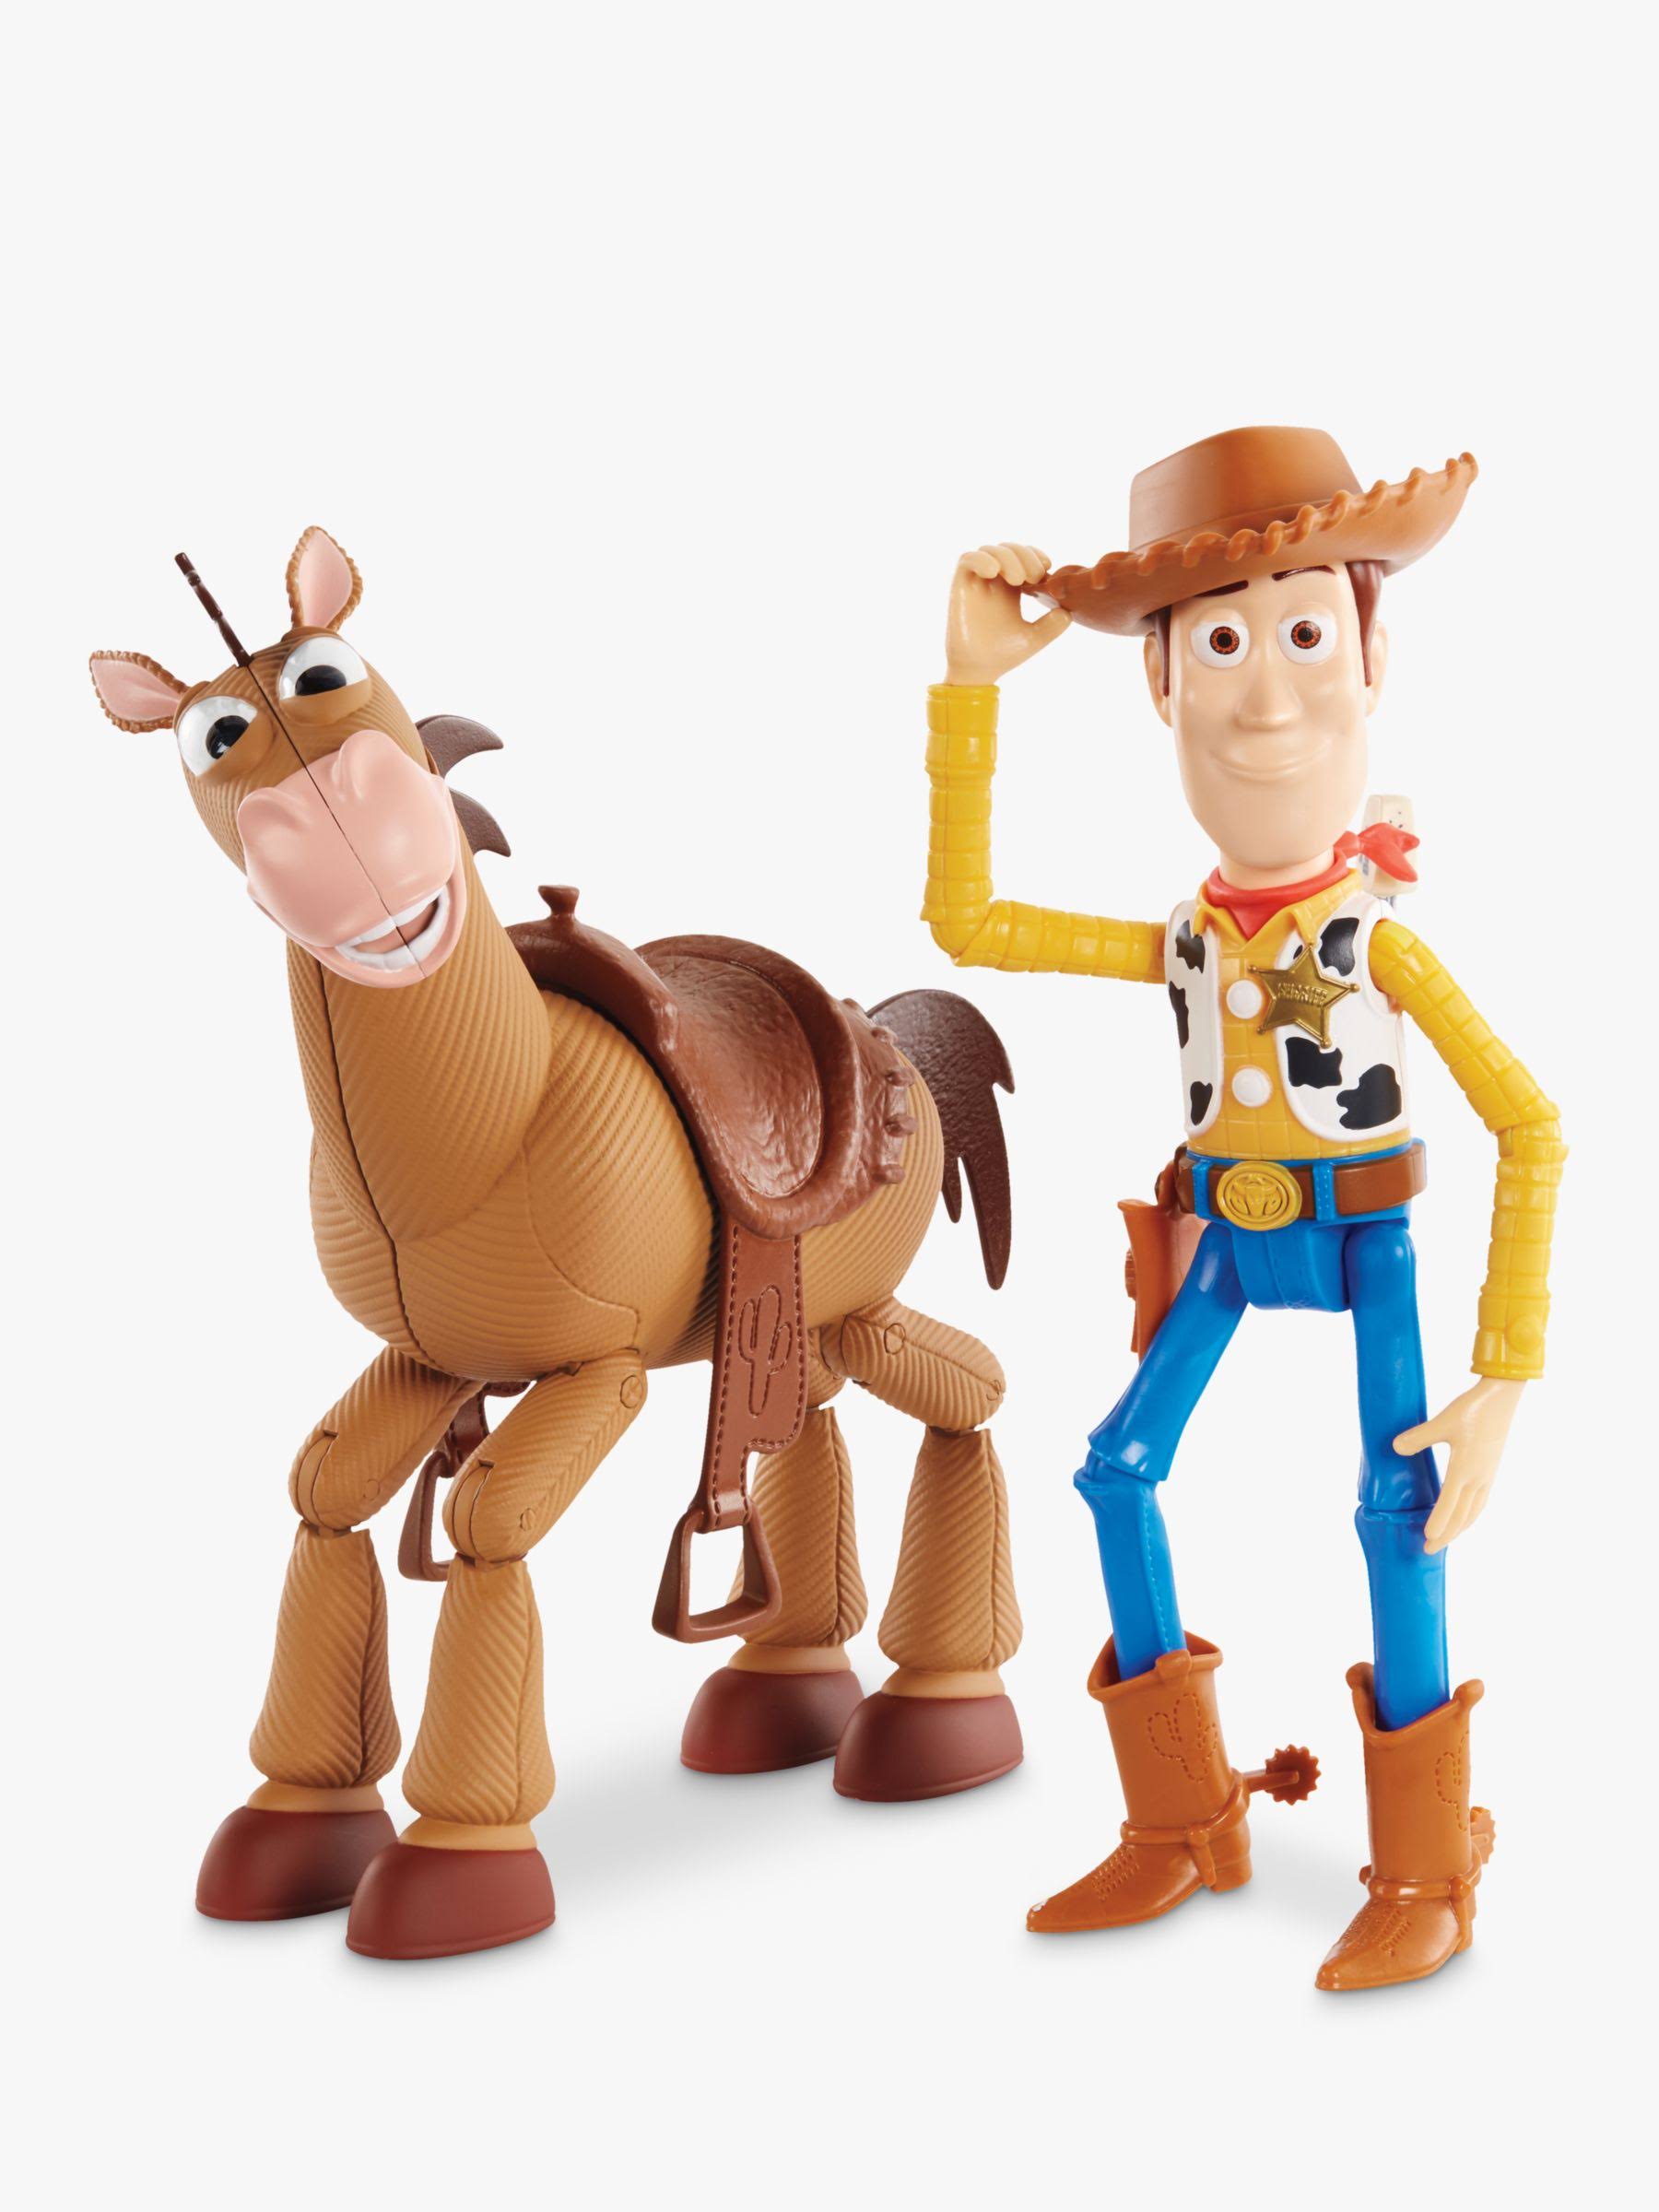 Fisher Price Forky and Woody Toy Story 4 Disney Pixar Imaginext